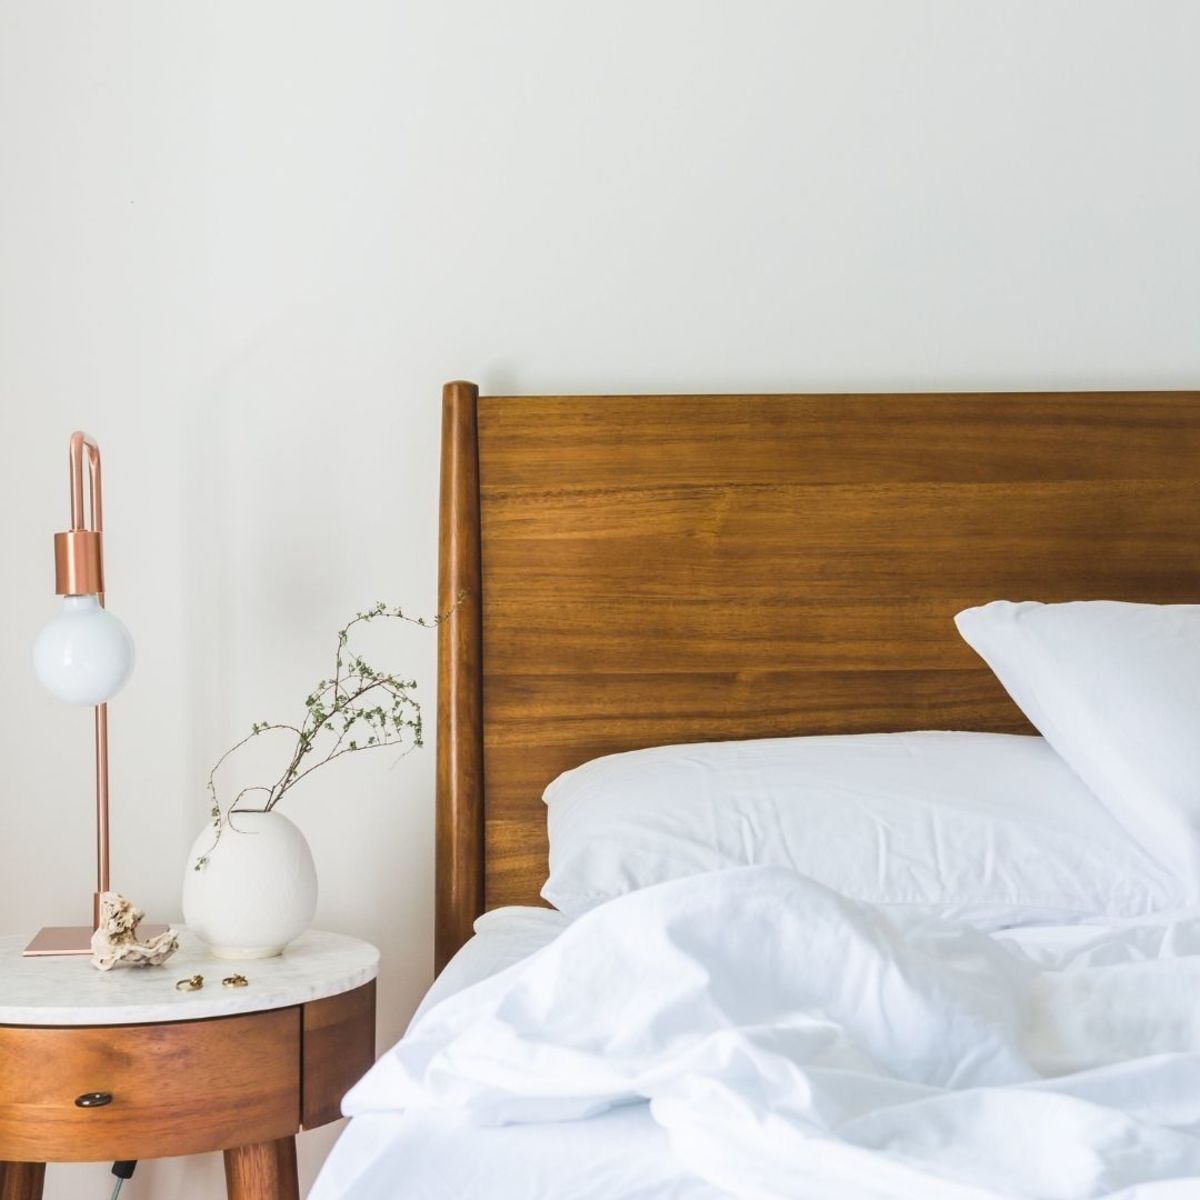 A good feng shui bedroom will promote a harmonious flow of good energy to relax, heal and de-stress. This can improve your health and vitality.